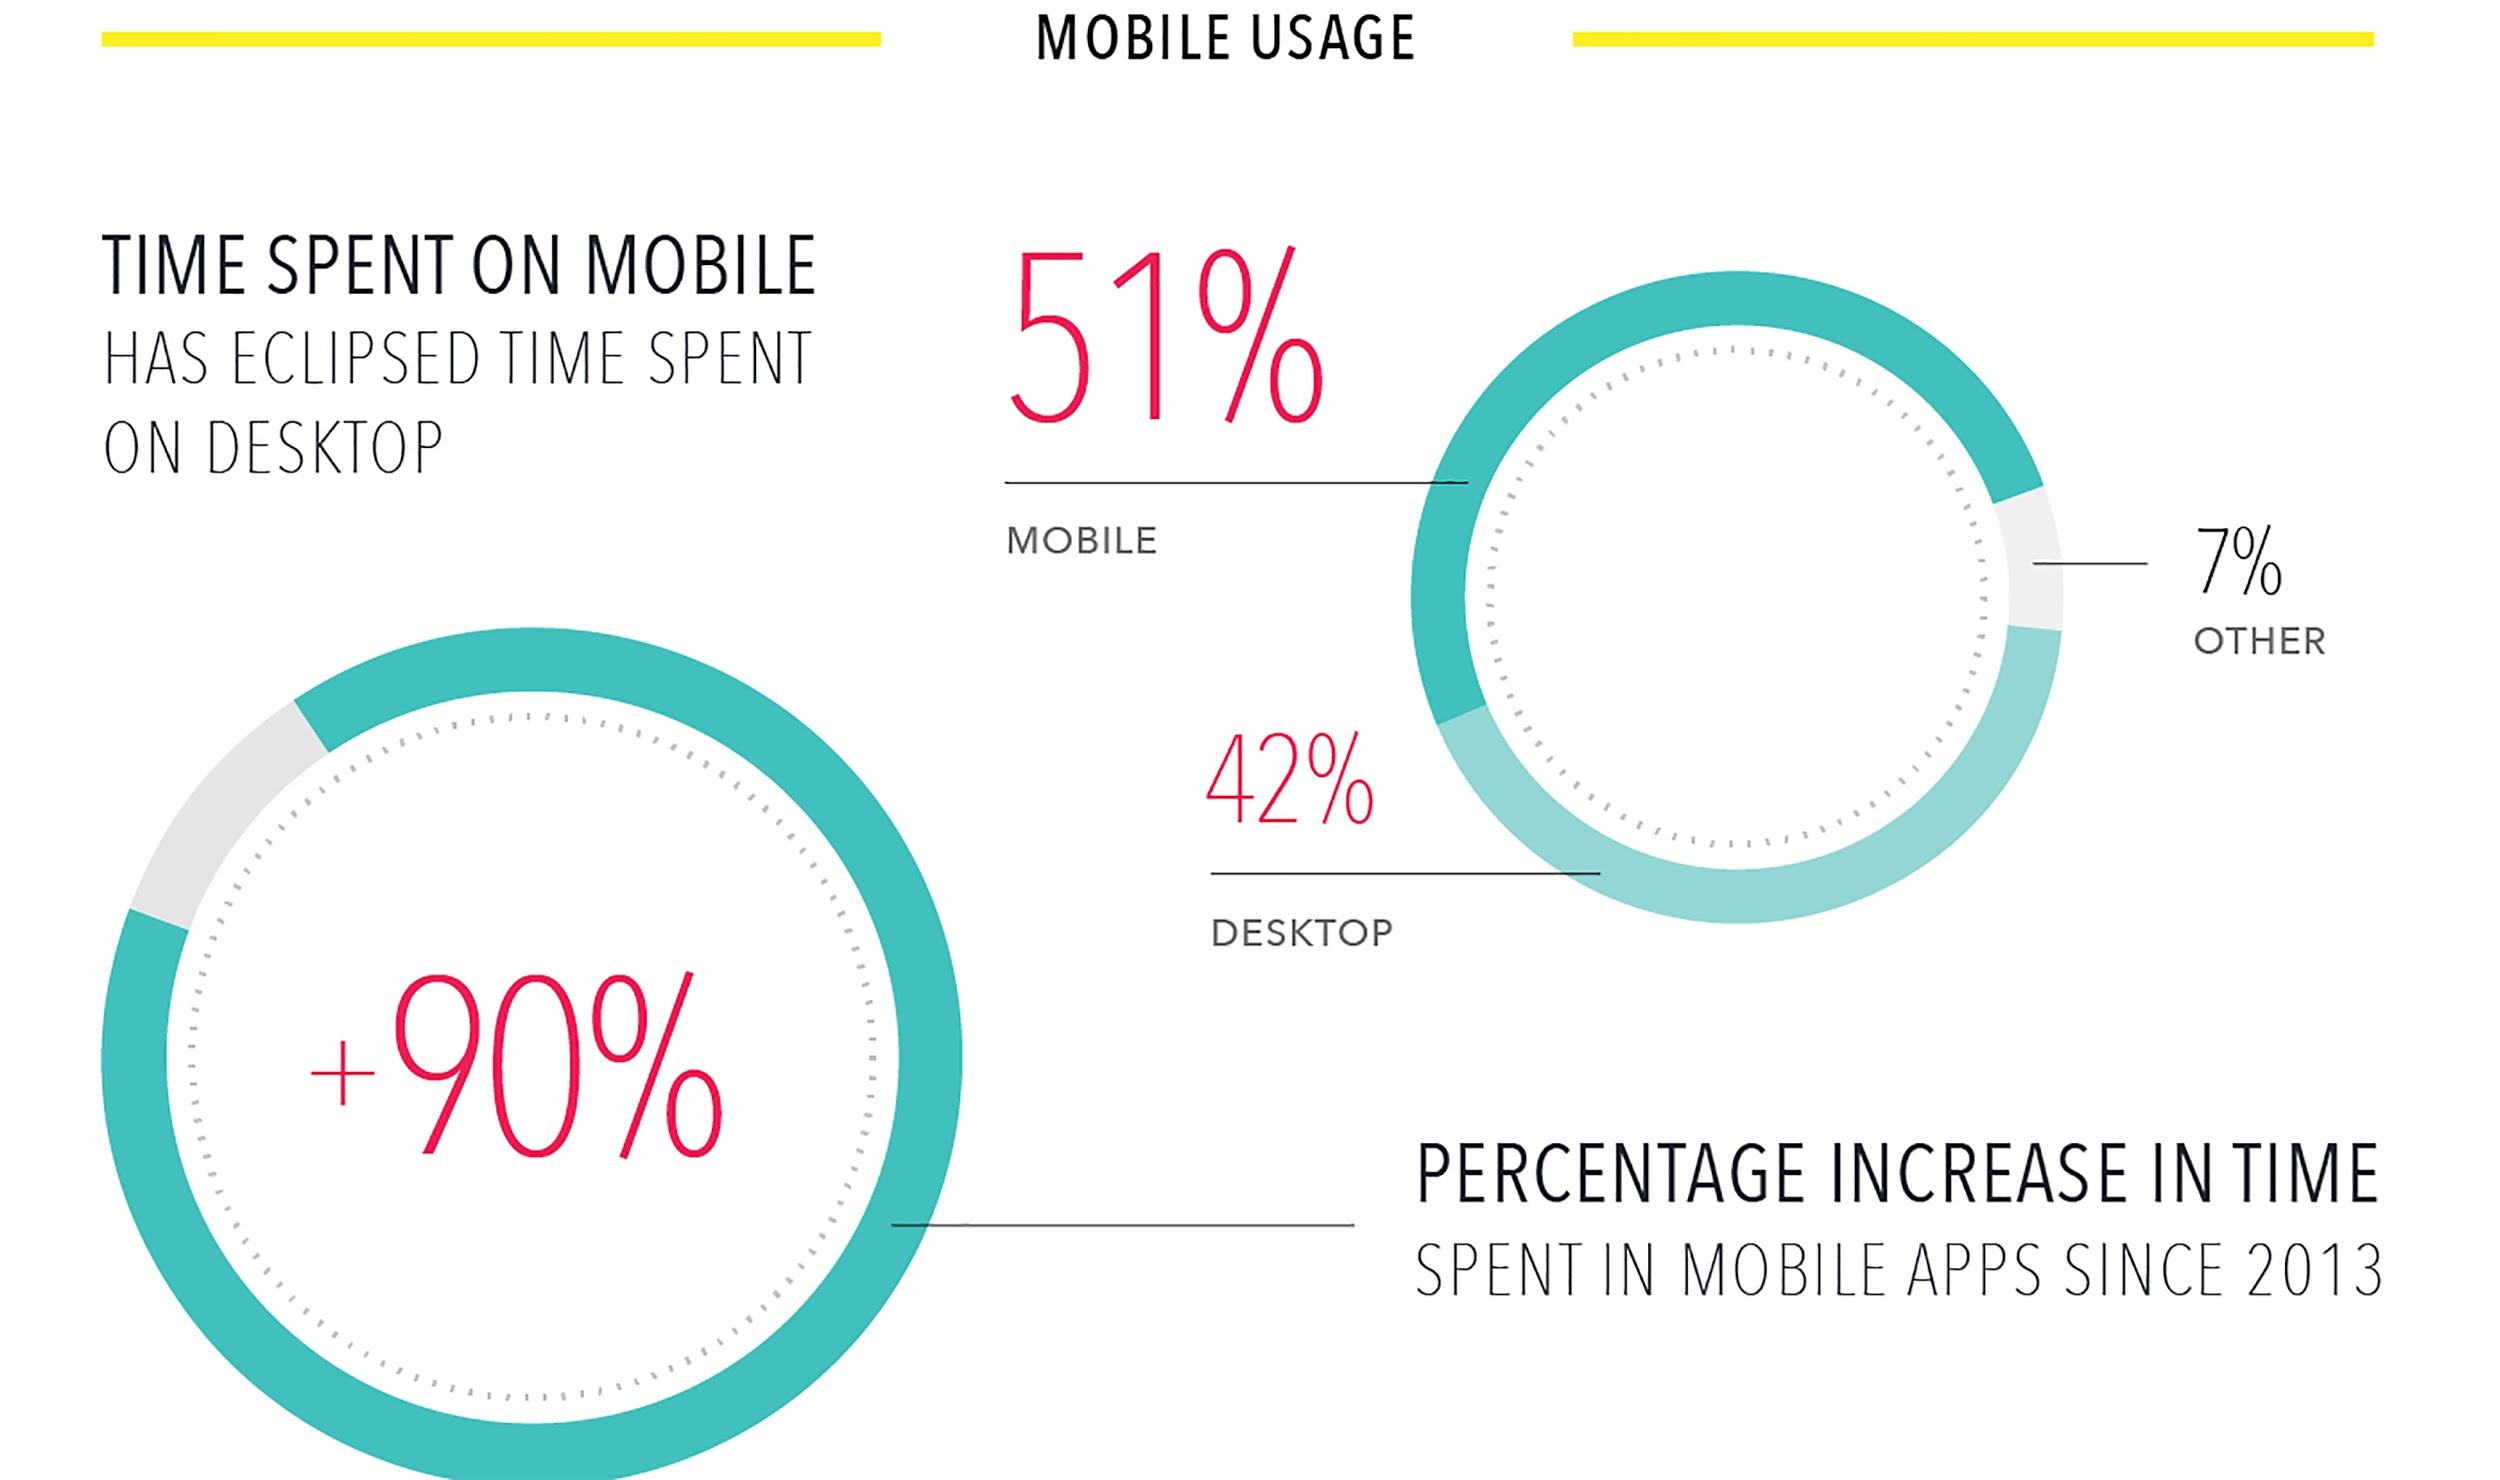 time spent on mobile devices in comparison to desktop